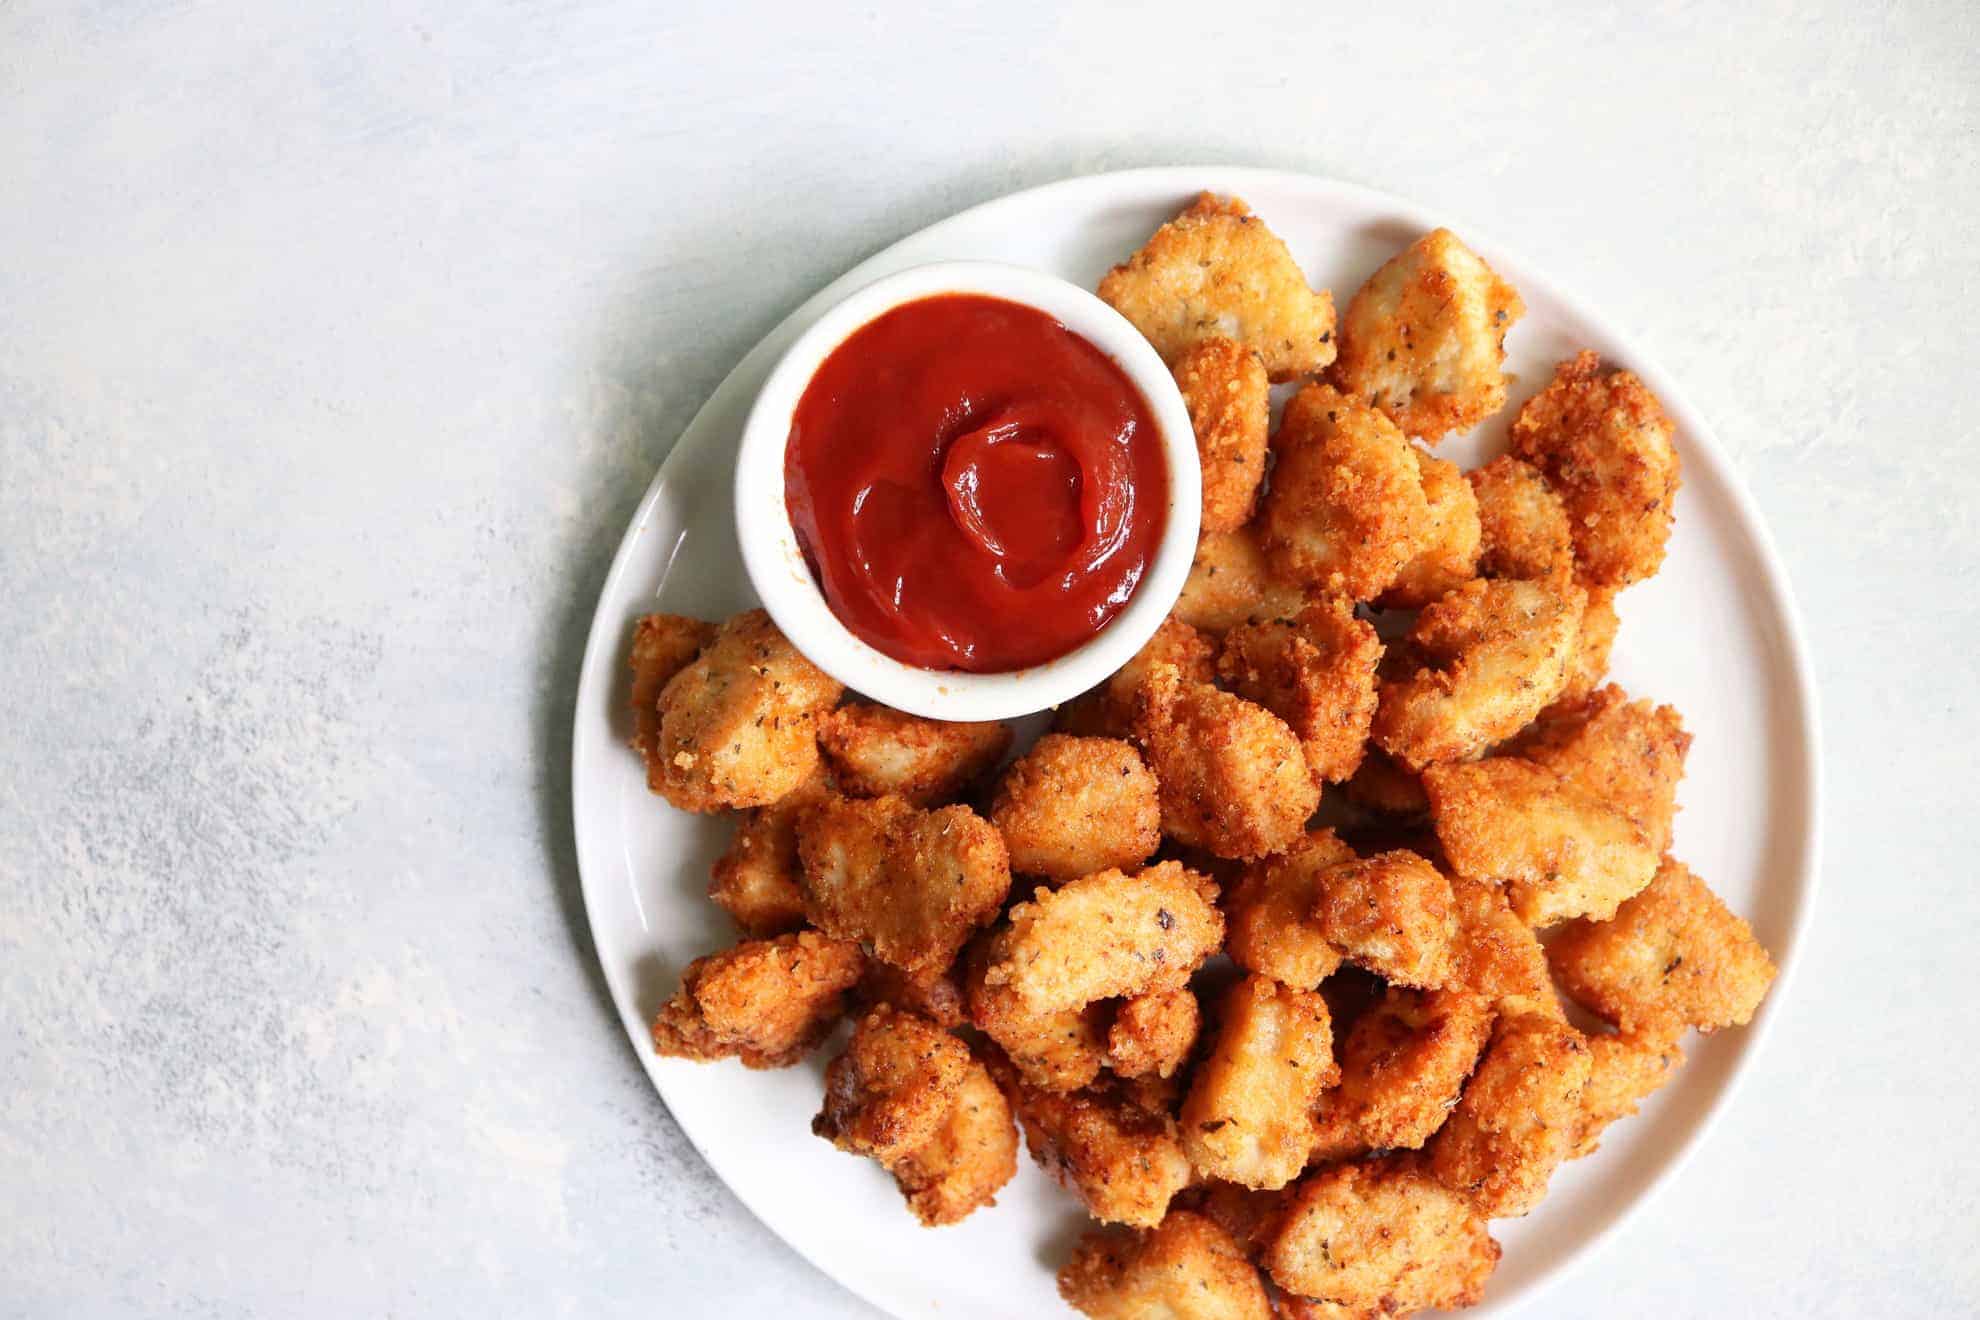 This is an overhead image of a white plate filled with chicken nuggets. A small white bowl filled with ketchup is also on the plate with the nuggets. The plate sites on a white and grey surface.